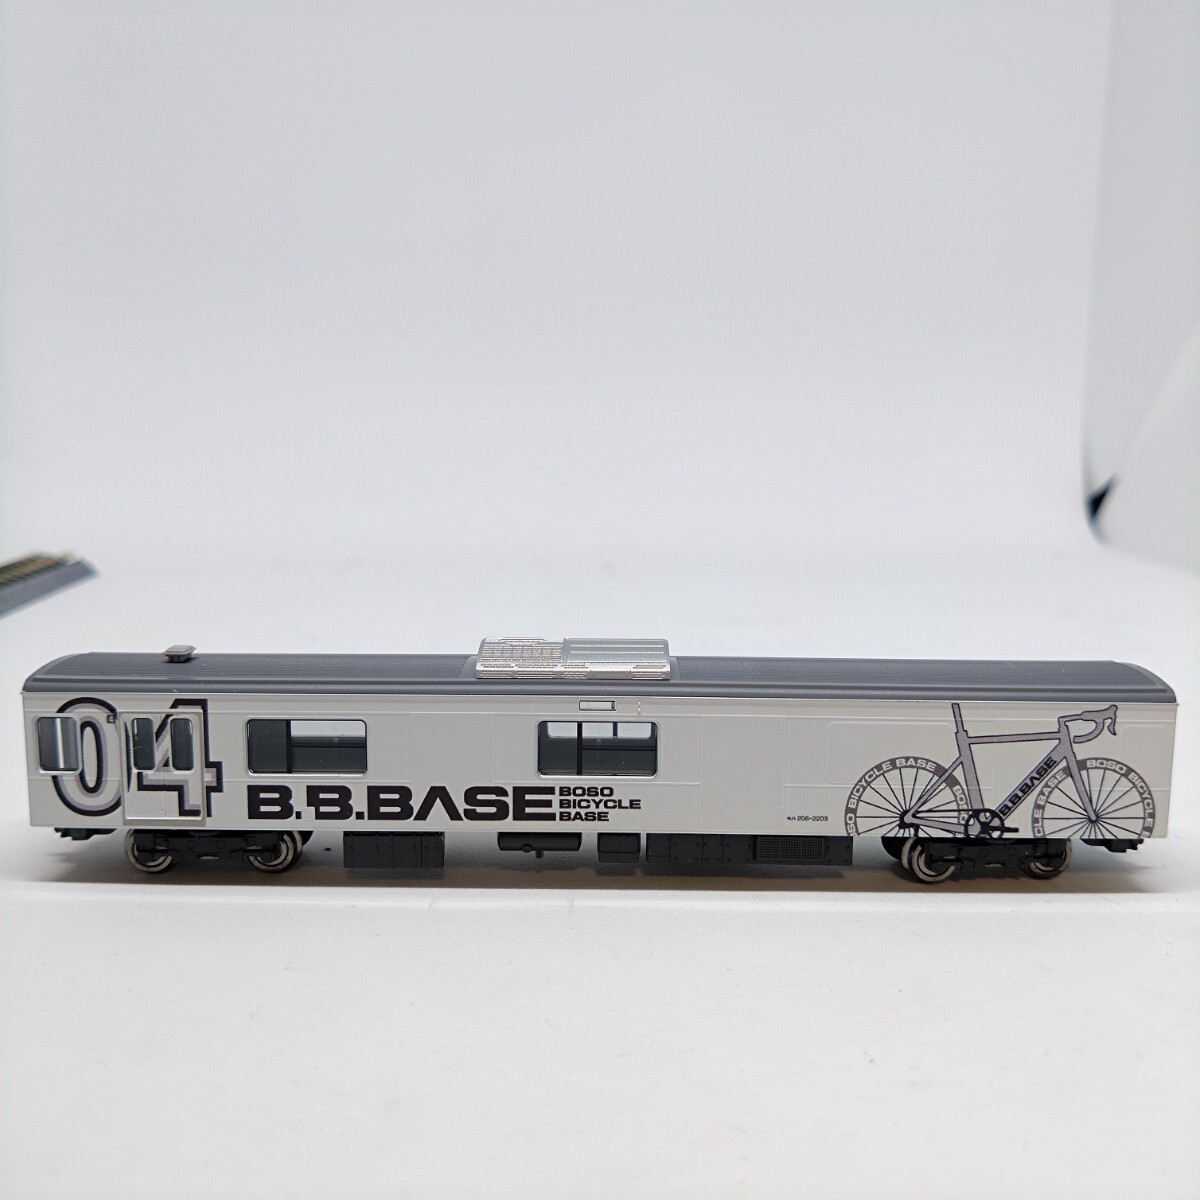 tomix 98643 JR 209 2200系電車 BOSO BICYCLE BASE バラシ モハ208 2203 の画像3